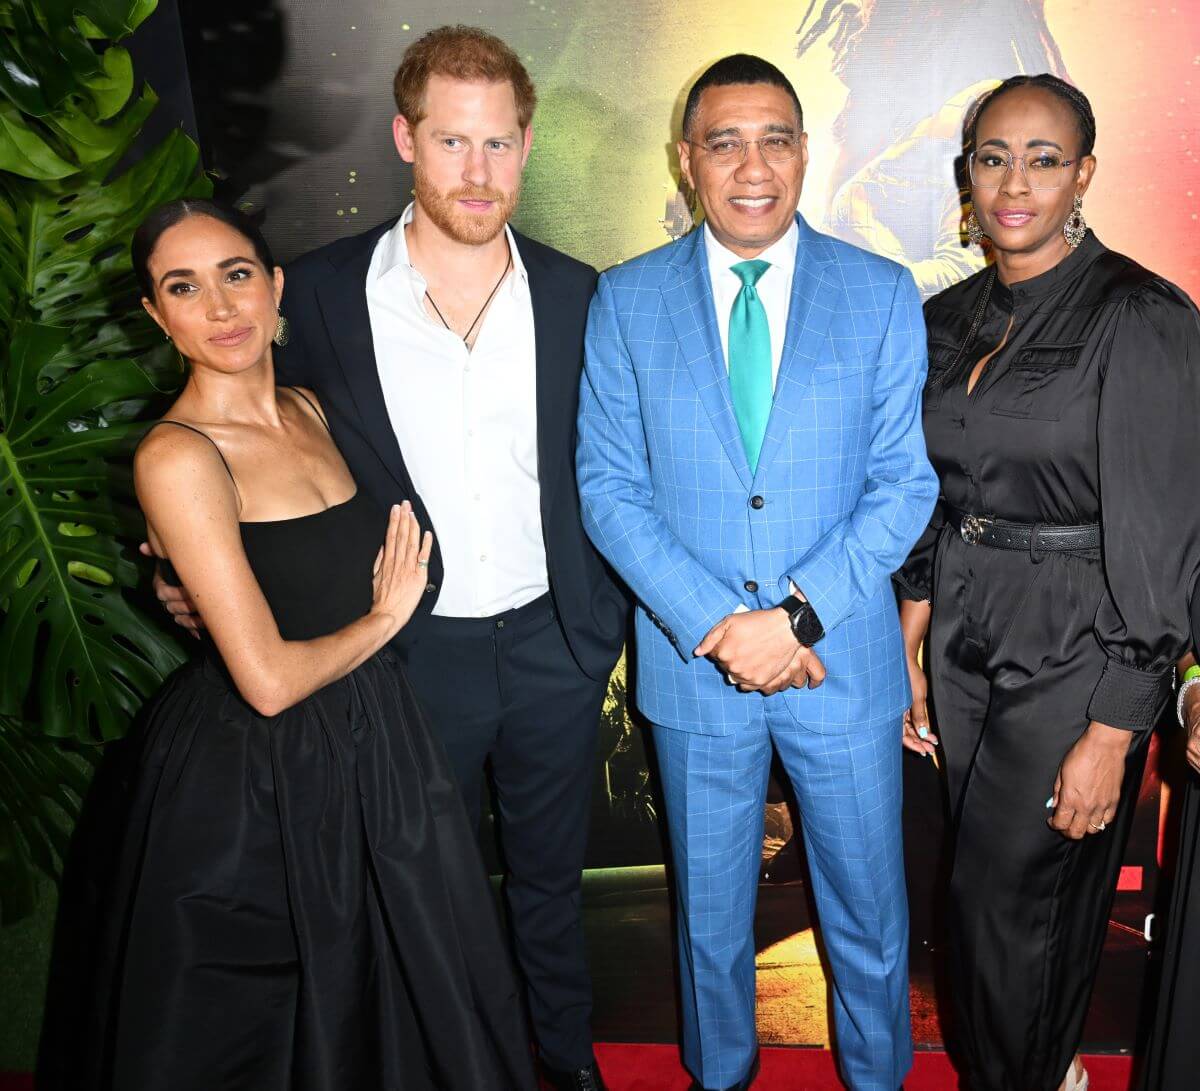 Lip Reader Reveals What Prince Harry and Meghan Said After Awkward Seating Arrangement to Jamaica’s Prime Minister at ‘Bob Marley: One Love’ Premiere